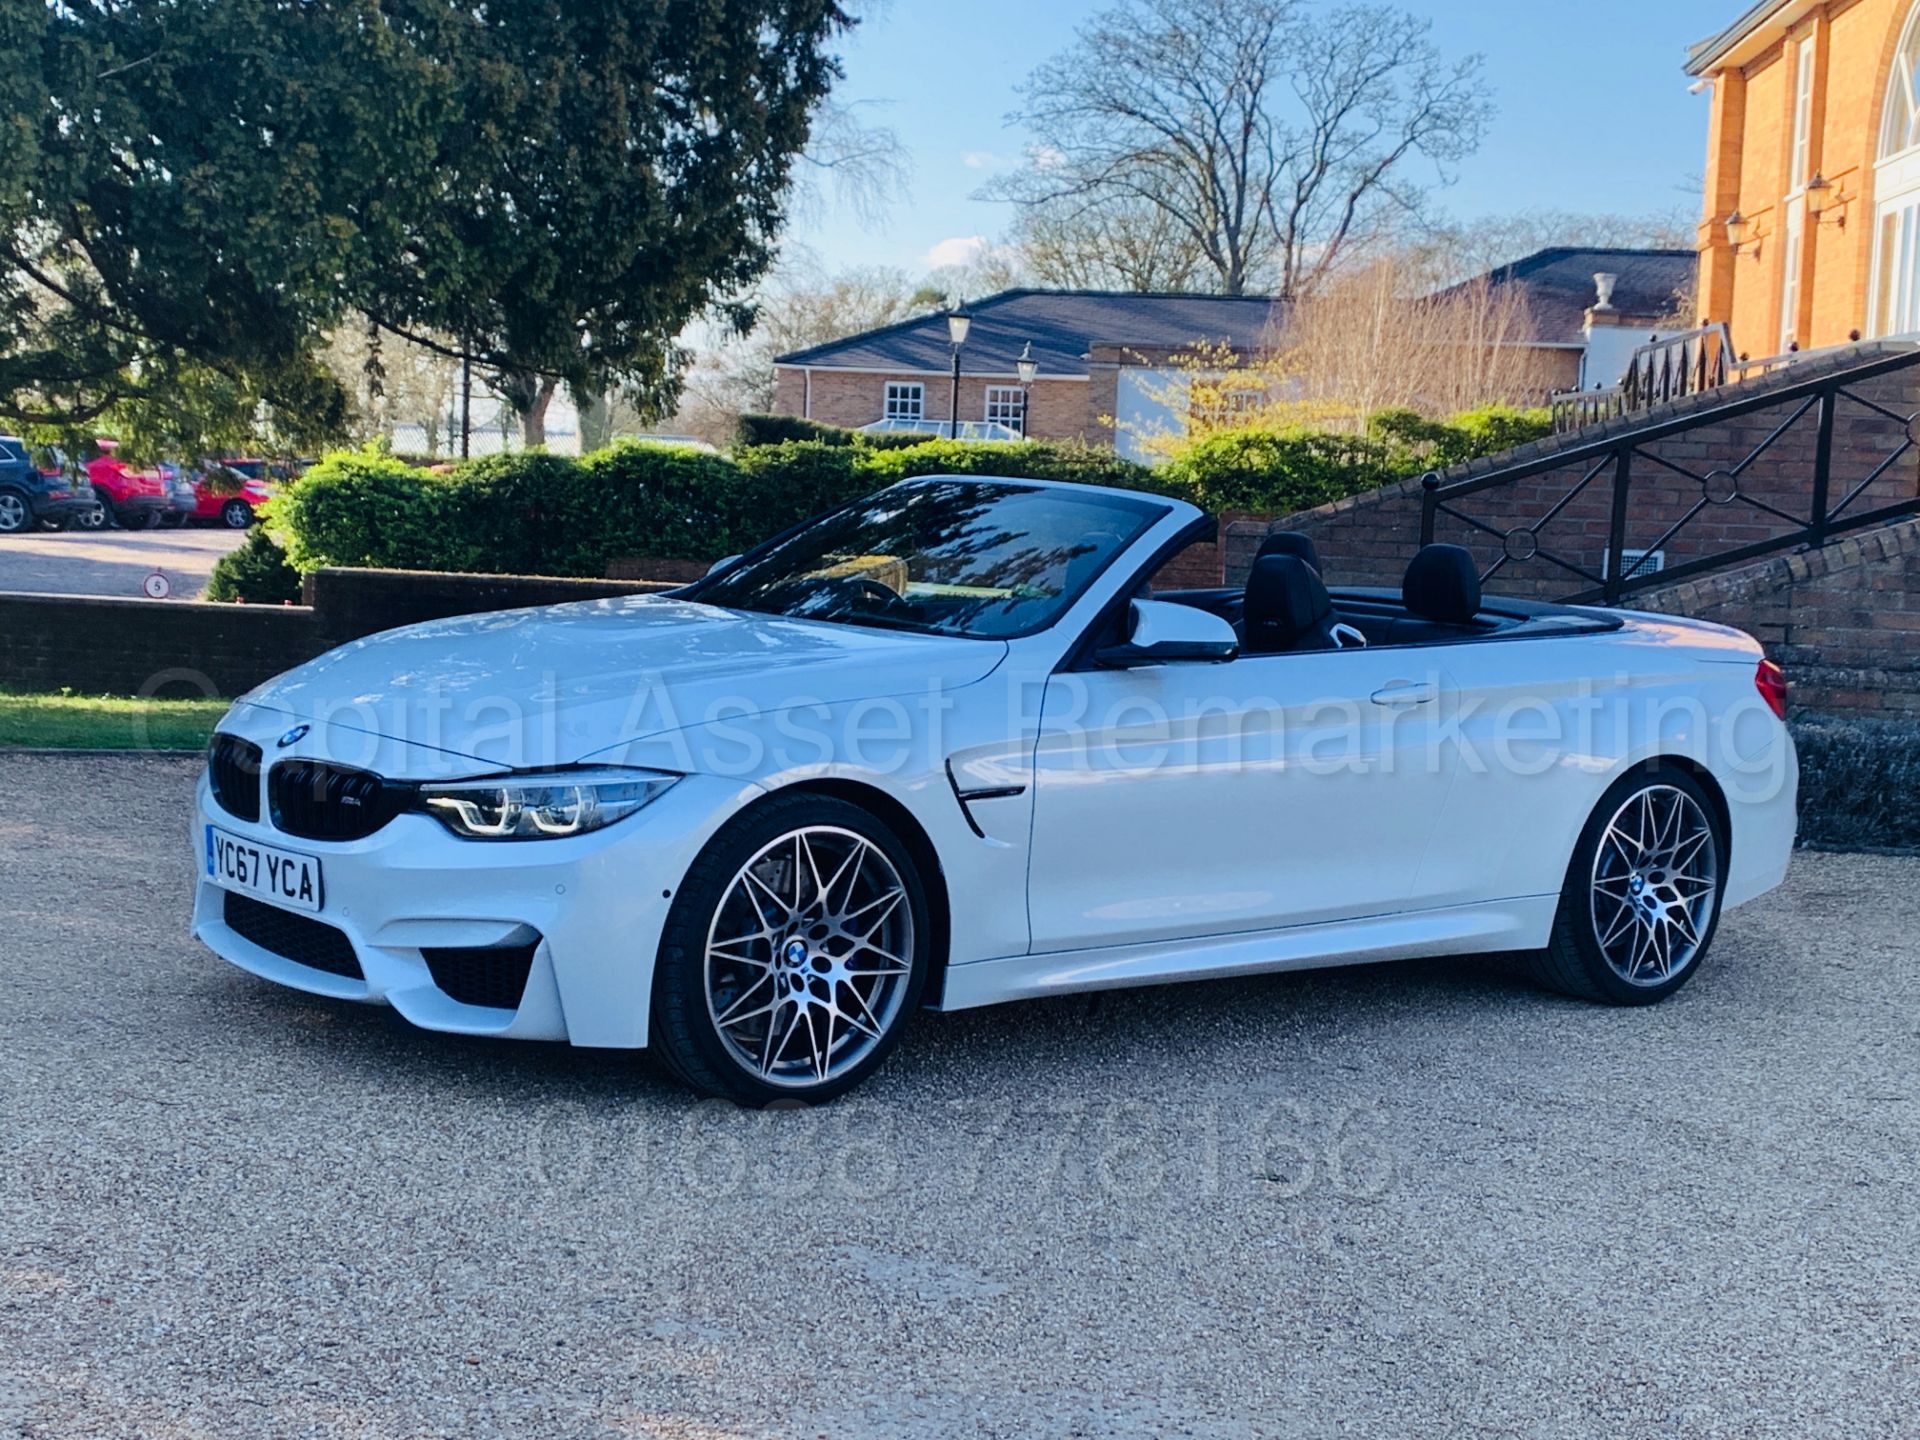 ON SALE BMW M4 CONVERTIBLE *COMPETITION PACKAGE* (2018 MODEL) '431 BHP - M DCT AUTO' WOW!!!!!